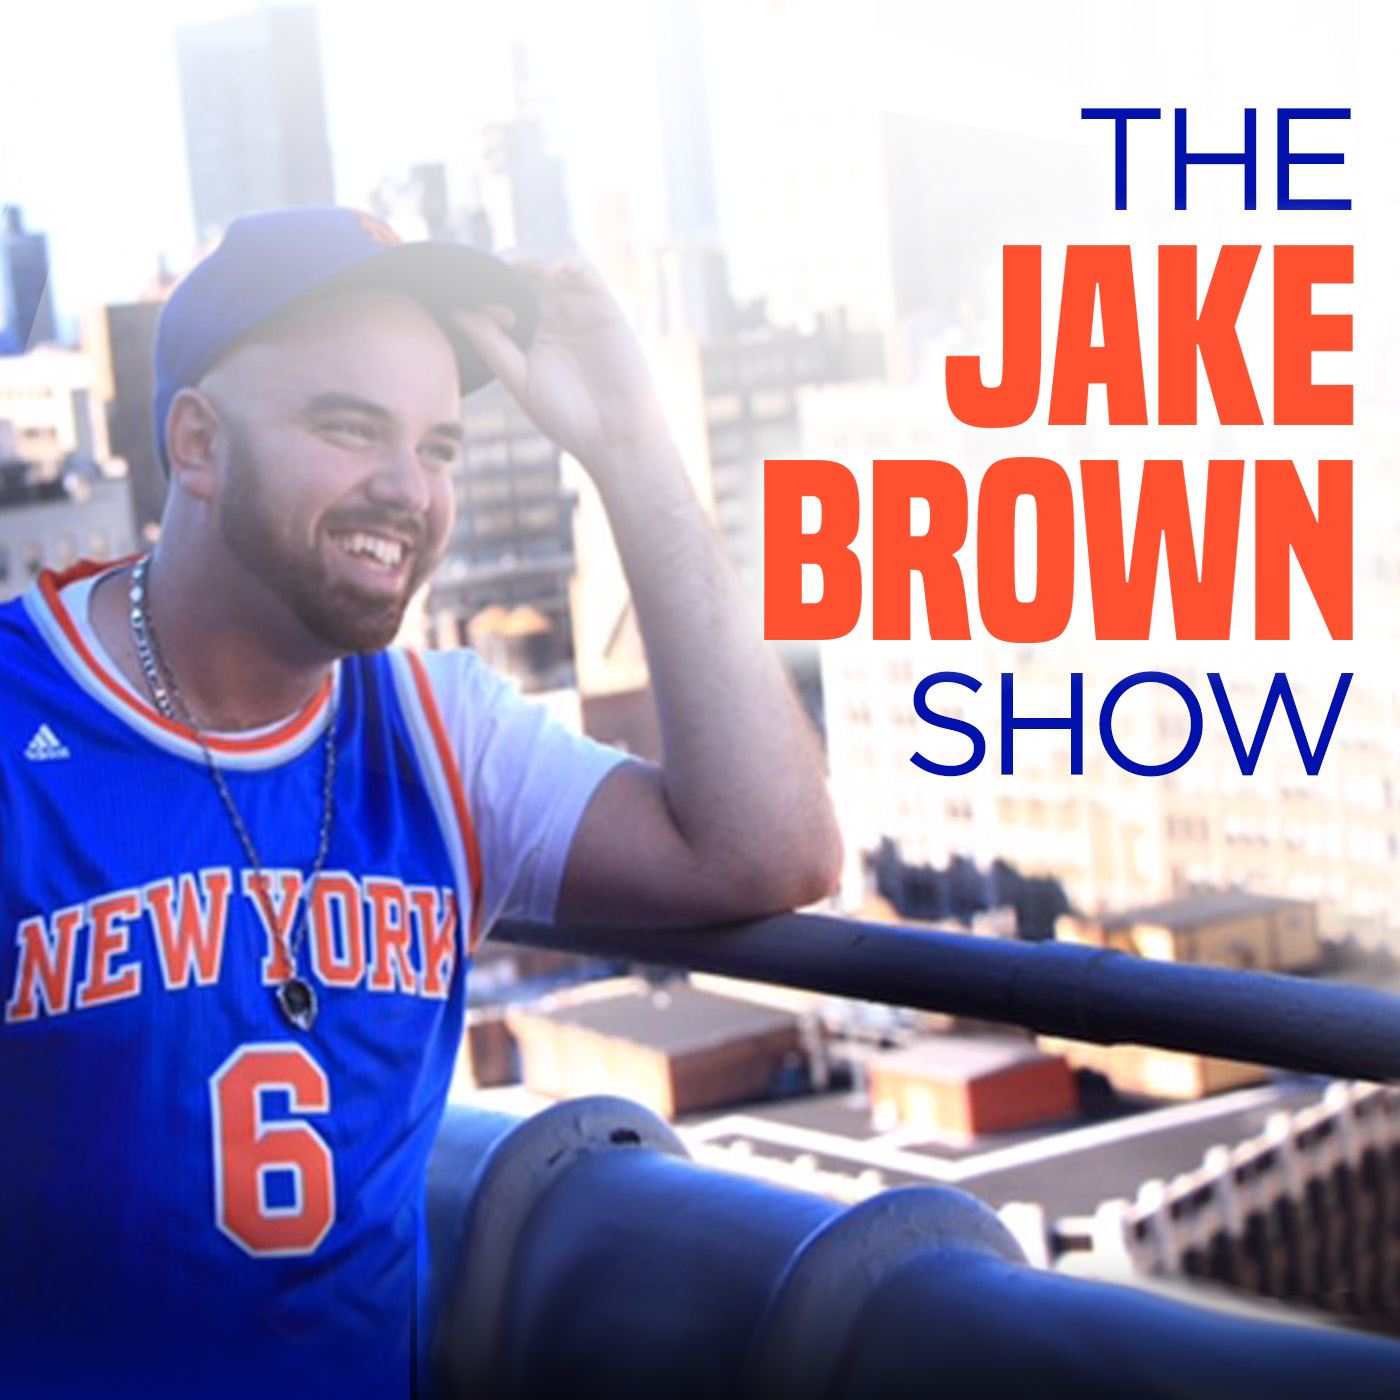 The Jake Brown Show Farewell